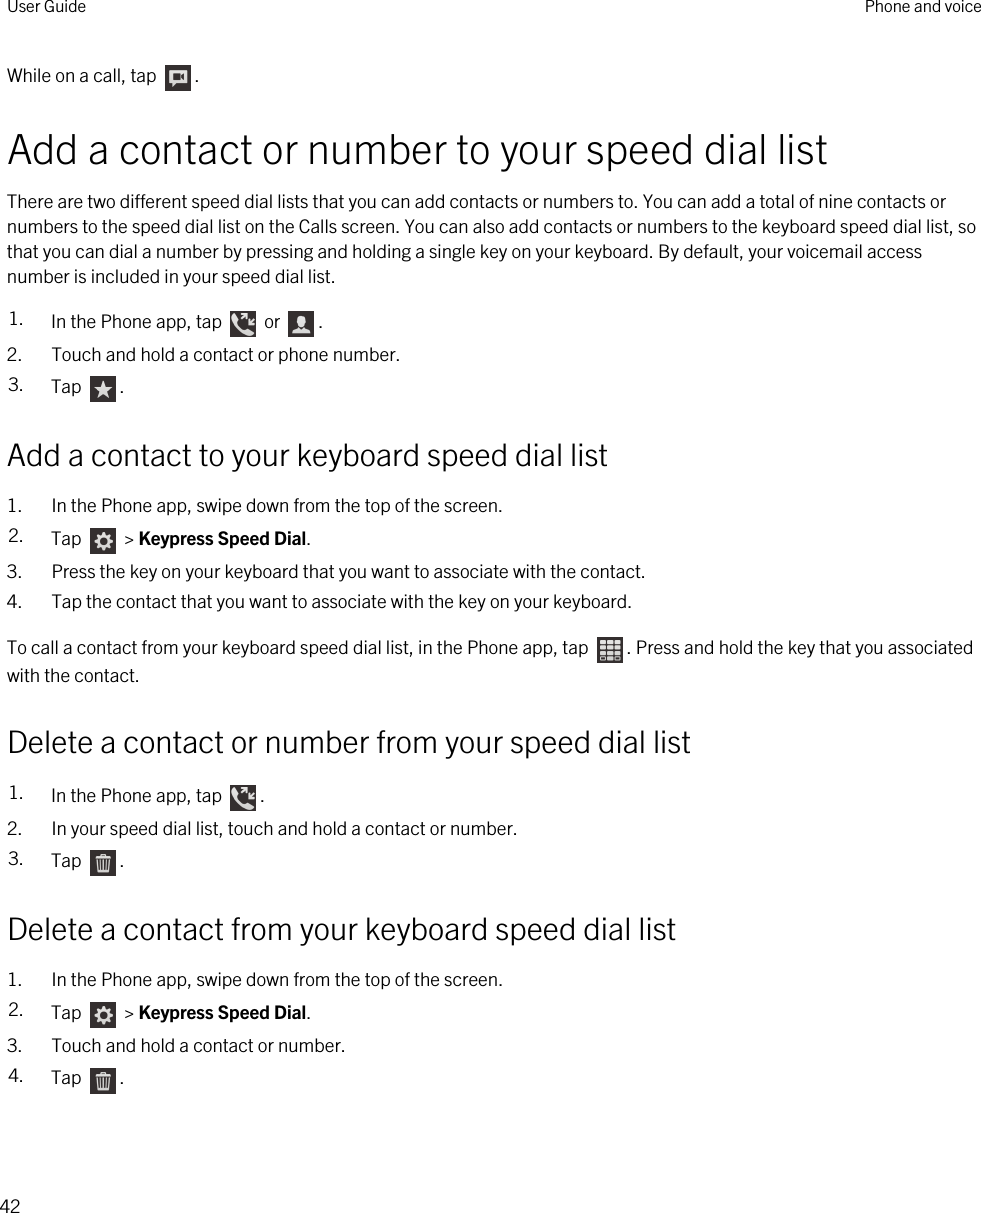 While on a call, tap  .Add a contact or number to your speed dial listThere are two different speed dial lists that you can add contacts or numbers to. You can add a total of nine contacts or numbers to the speed dial list on the Calls screen. You can also add contacts or numbers to the keyboard speed dial list, so that you can dial a number by pressing and holding a single key on your keyboard. By default, your voicemail access number is included in your speed dial list.1. In the Phone app, tap   or  .2. Touch and hold a contact or phone number.3. Tap  .Add a contact to your keyboard speed dial list1. In the Phone app, swipe down from the top of the screen.2. Tap   &gt; Keypress Speed Dial.3. Press the key on your keyboard that you want to associate with the contact.4. Tap the contact that you want to associate with the key on your keyboard.To call a contact from your keyboard speed dial list, in the Phone app, tap  . Press and hold the key that you associated with the contact.Delete a contact or number from your speed dial list1. In the Phone app, tap  .2. In your speed dial list, touch and hold a contact or number.3. Tap  .Delete a contact from your keyboard speed dial list1. In the Phone app, swipe down from the top of the screen.2. Tap   &gt; Keypress Speed Dial.3. Touch and hold a contact or number.4. Tap  .User Guide Phone and voice42